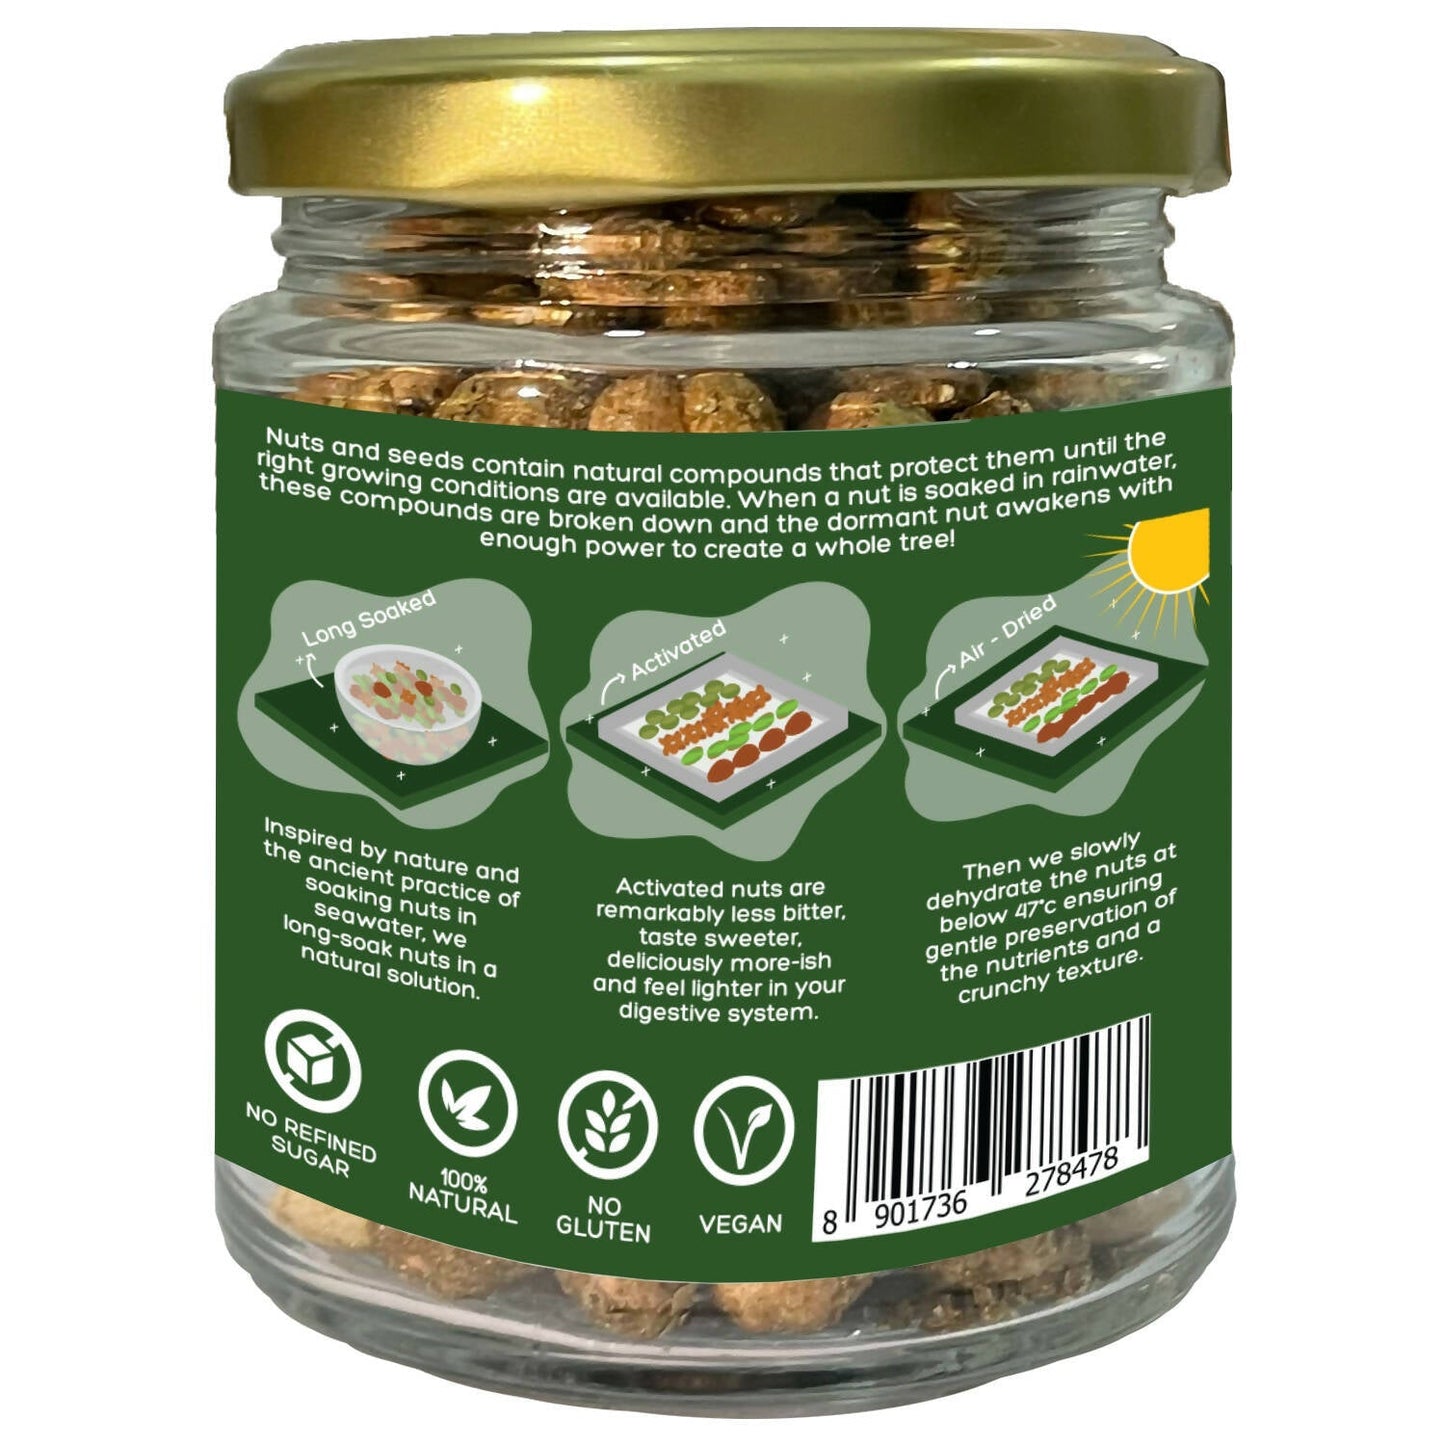 D-Alive Honestly Organic Activated Lime & Chilli Peanuts